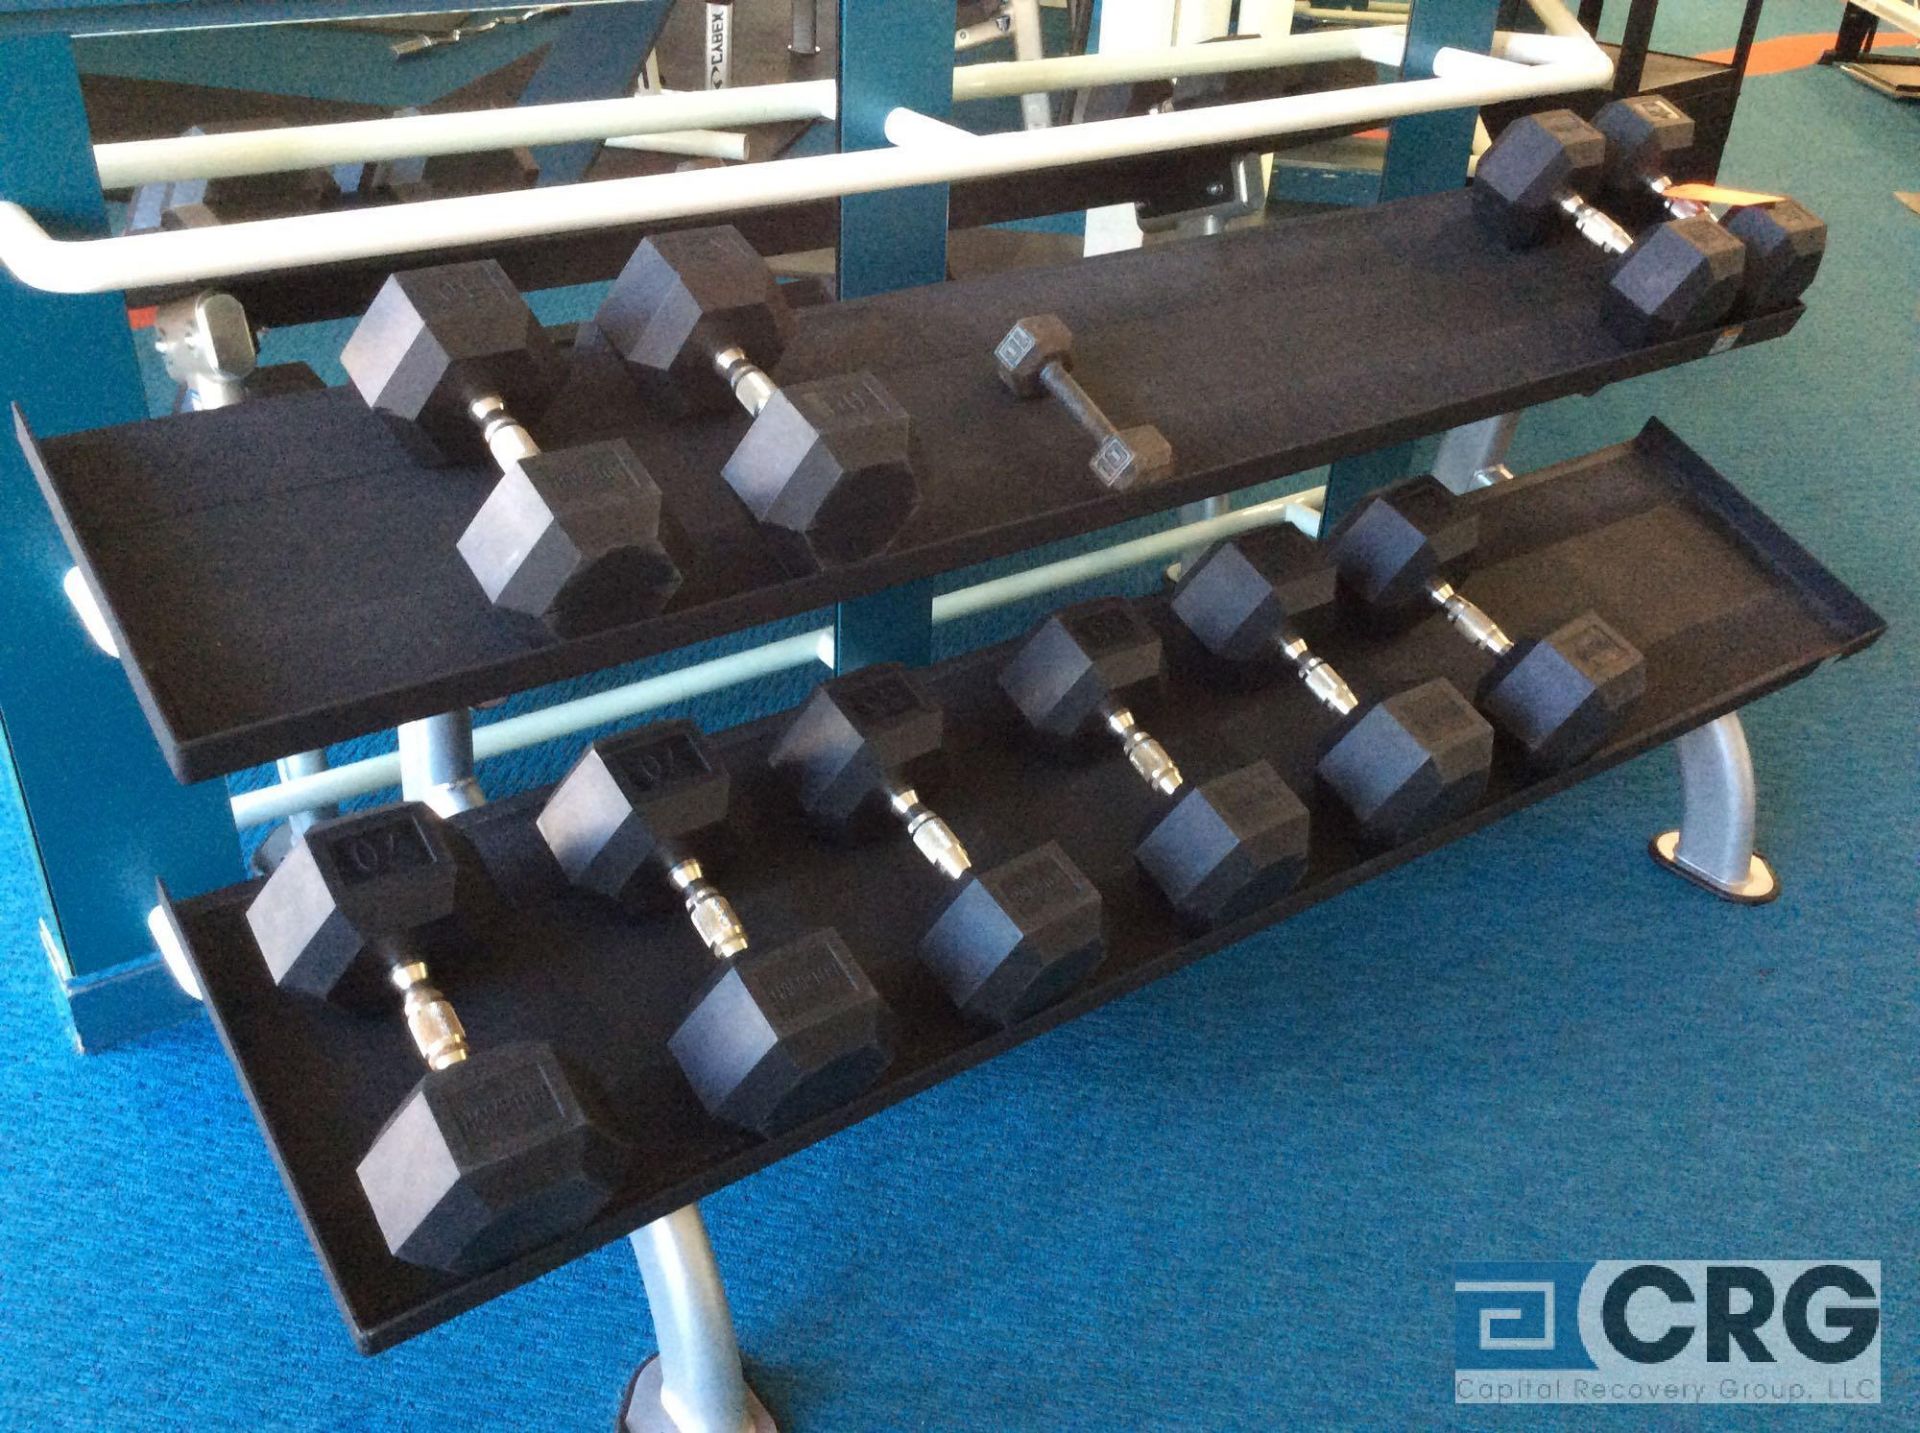 Lot of (27) assorted Cybex Dumbbells with Stands, and (6) asst AB Workout Stands, Stations and